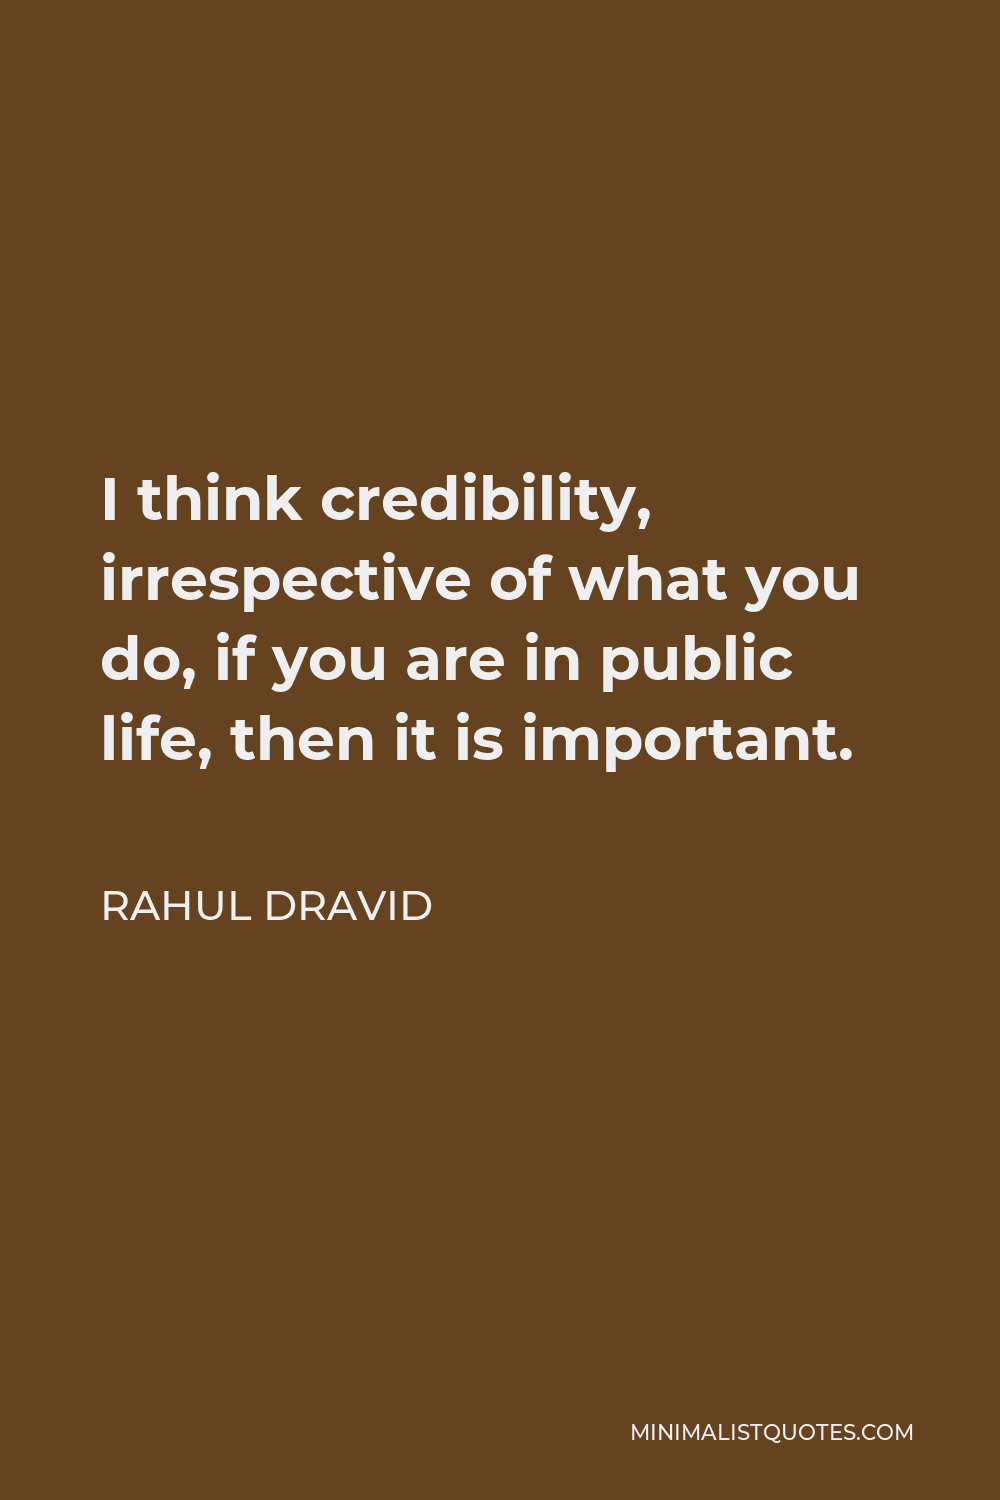 Rahul Dravid Quote - I think credibility, irrespective of what you do, if you are in public life, then it is important.